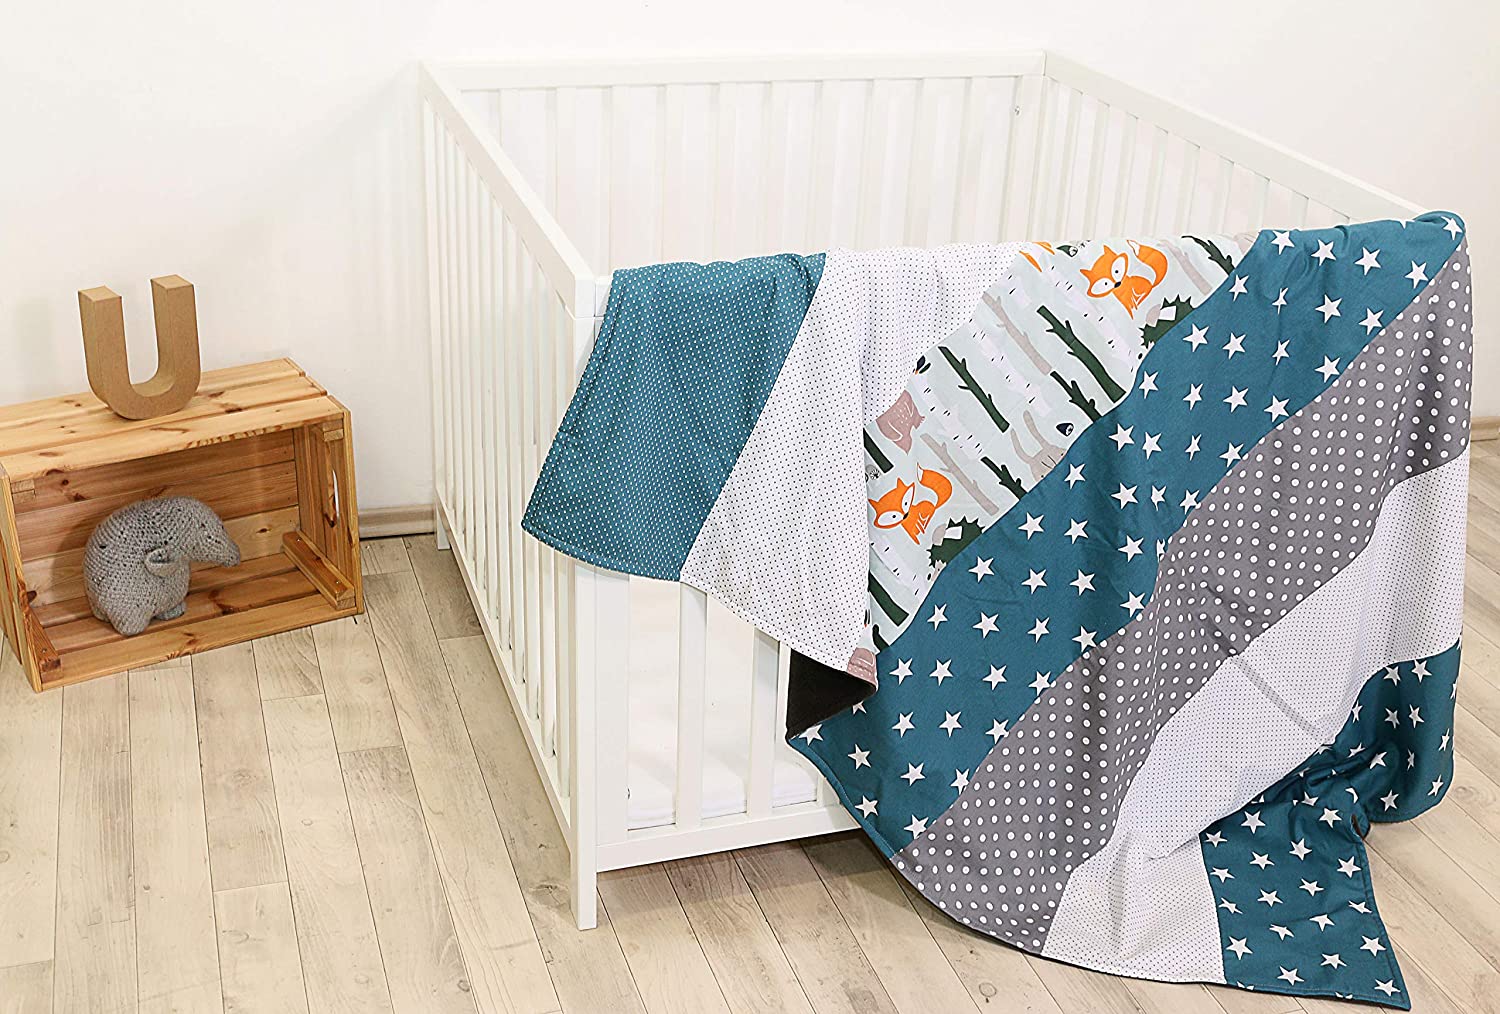 ULLENBOOM® Baby Blanket made of ÖkoTex Cotton and Fleece, Ideal as a Pram Blanket or Play Blanket, 70 x 100 cm & 100 x 140 cm and Made in the EU, Design: Stars, Dots, Patchwork 70 x 100 cm Forest Animals Petrol